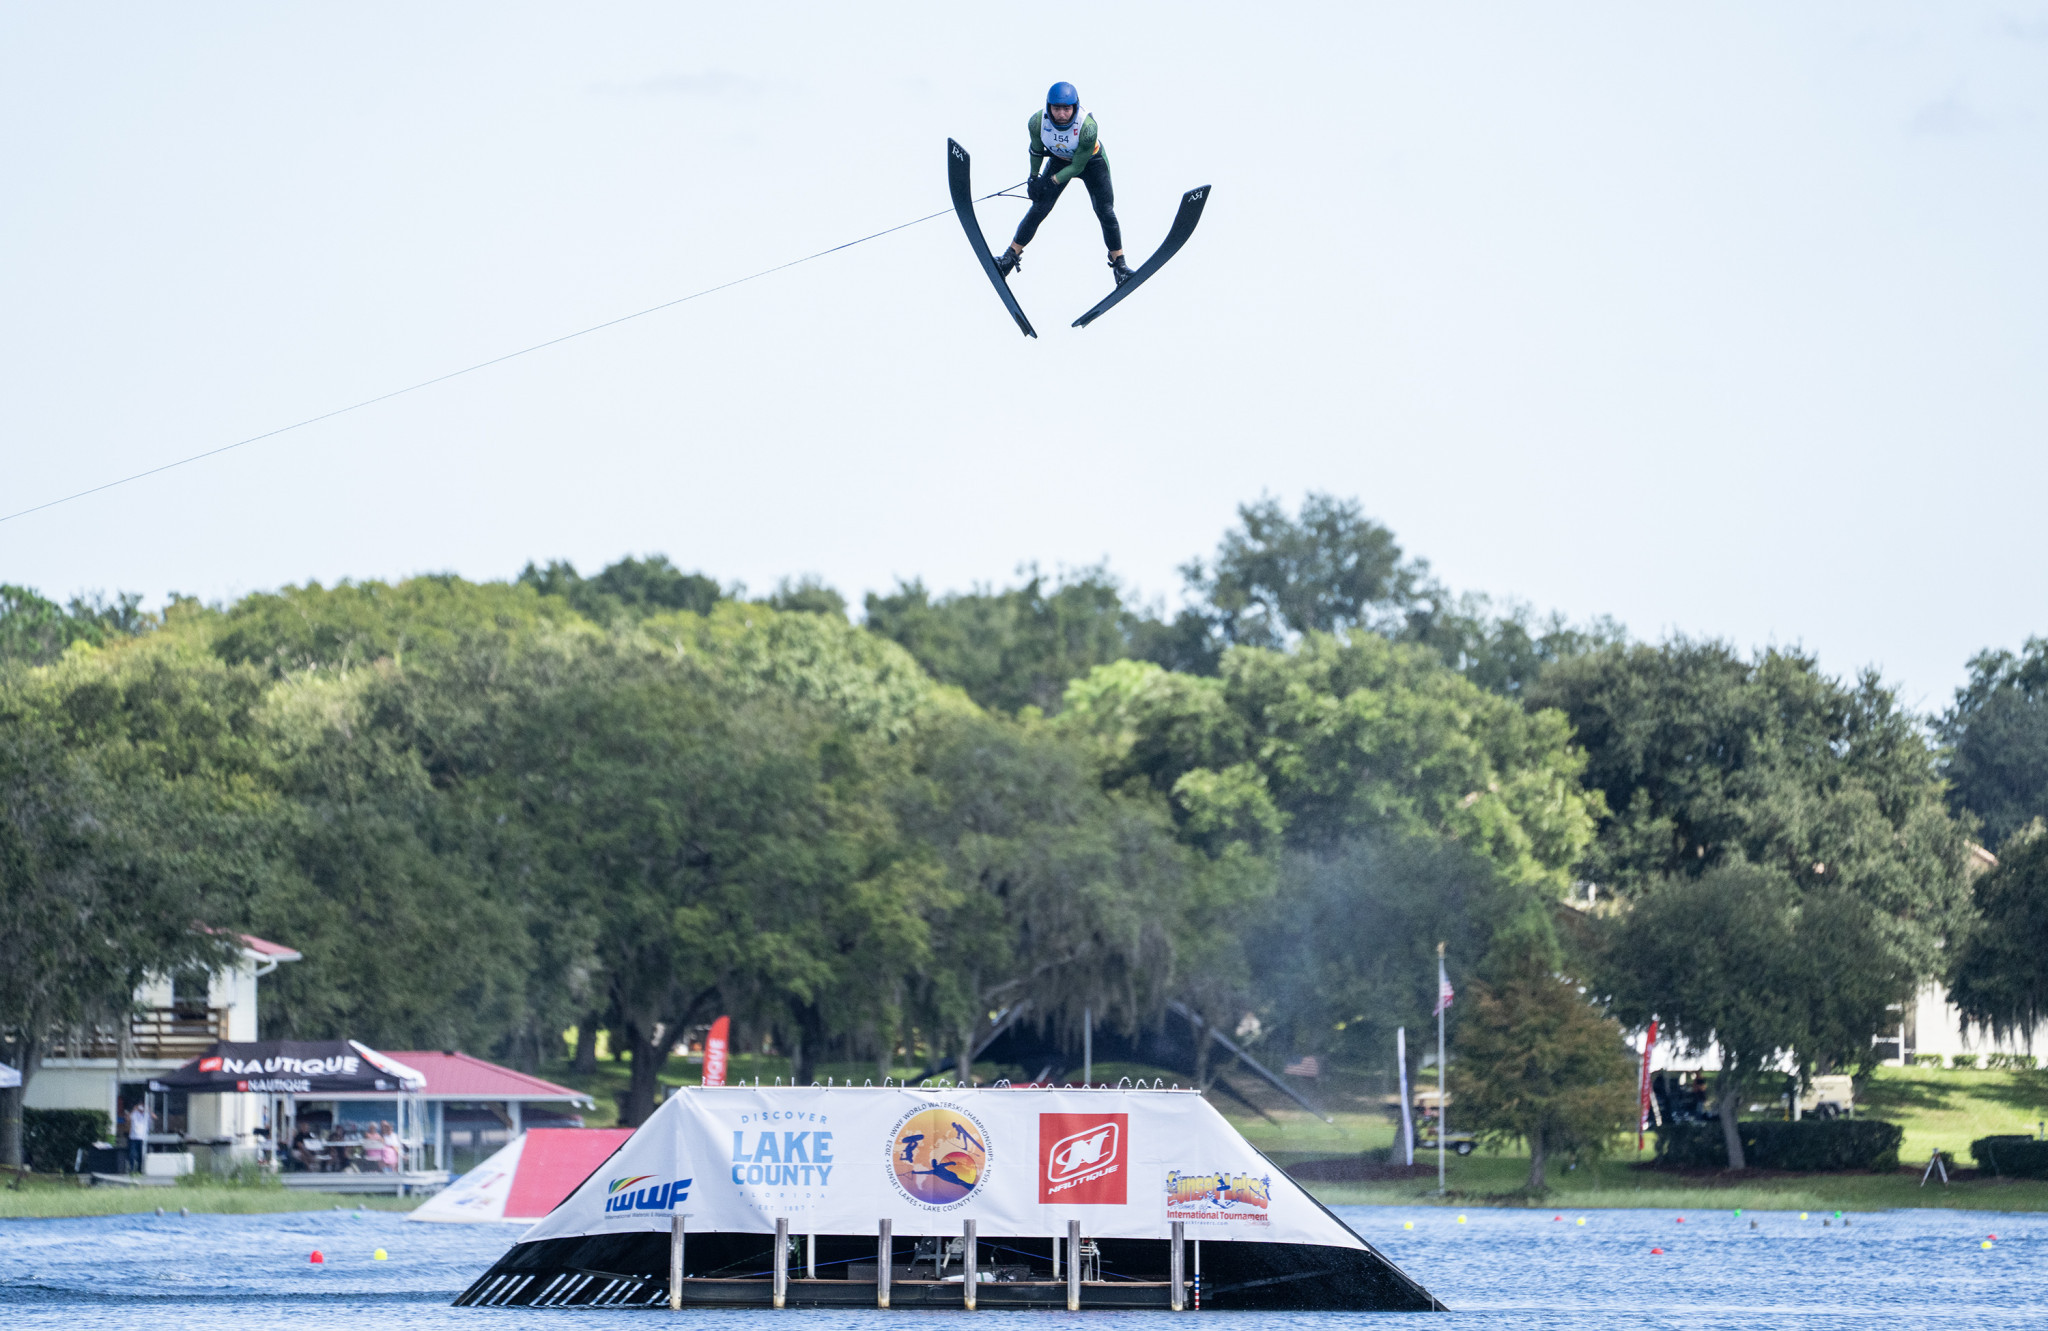 The 2023 IWWF World Waterski Championships were held at the Jack Travers Water Ski School at Sunset Lakes ©Getty Images